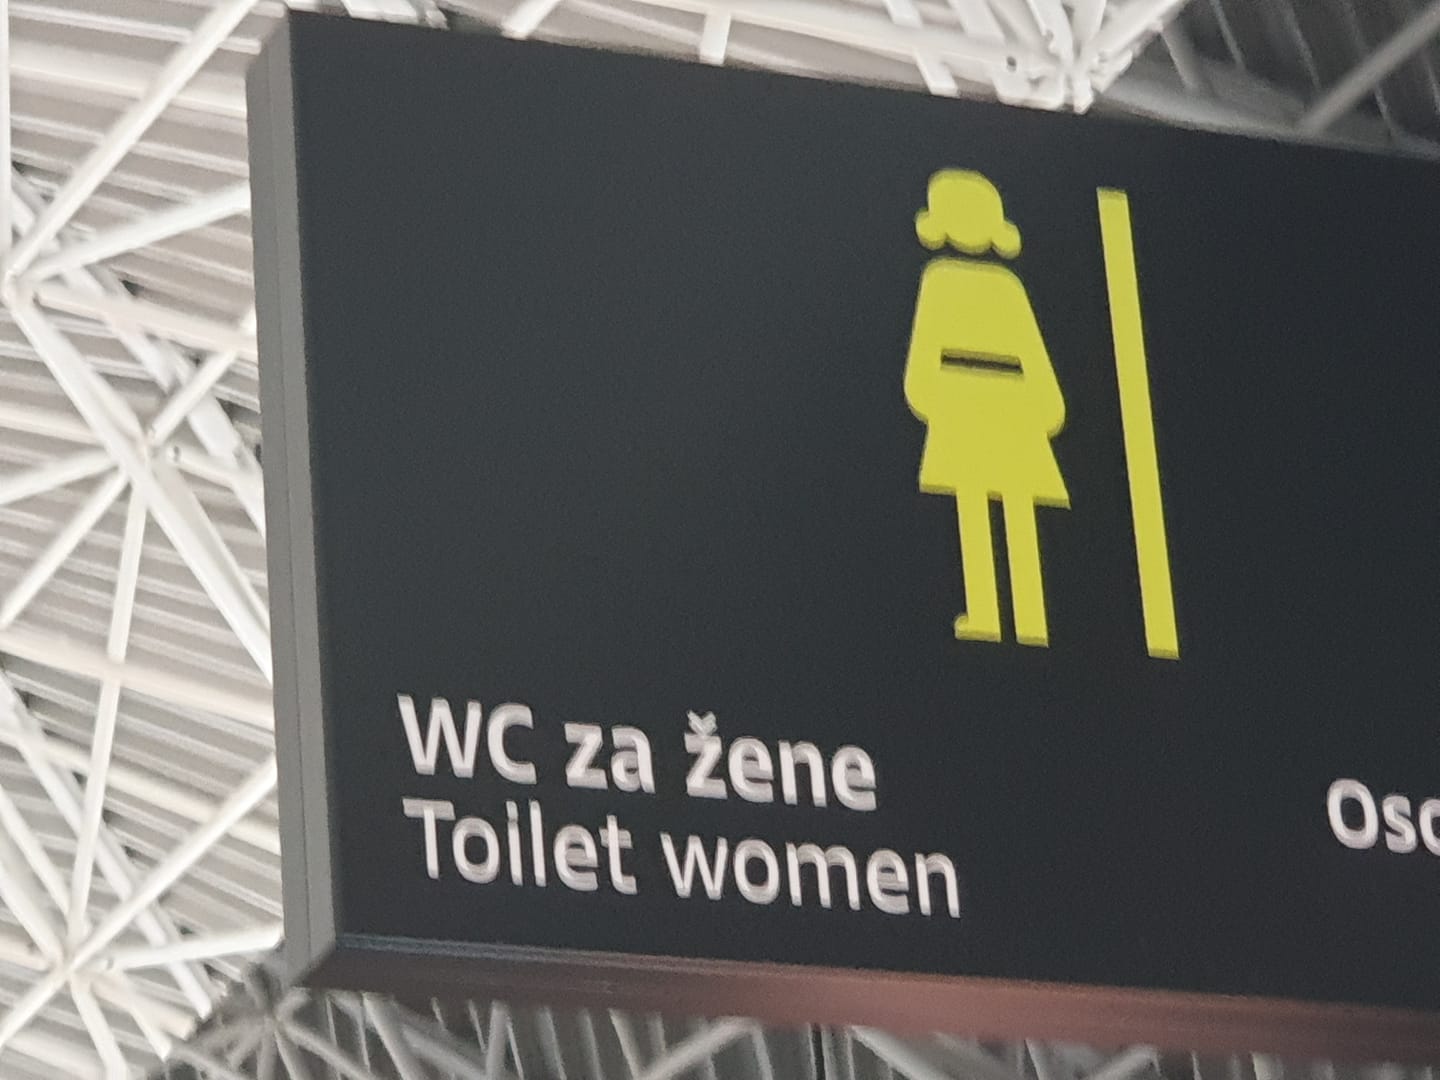 zagreb-airport-toilet-disabled (2).jpg